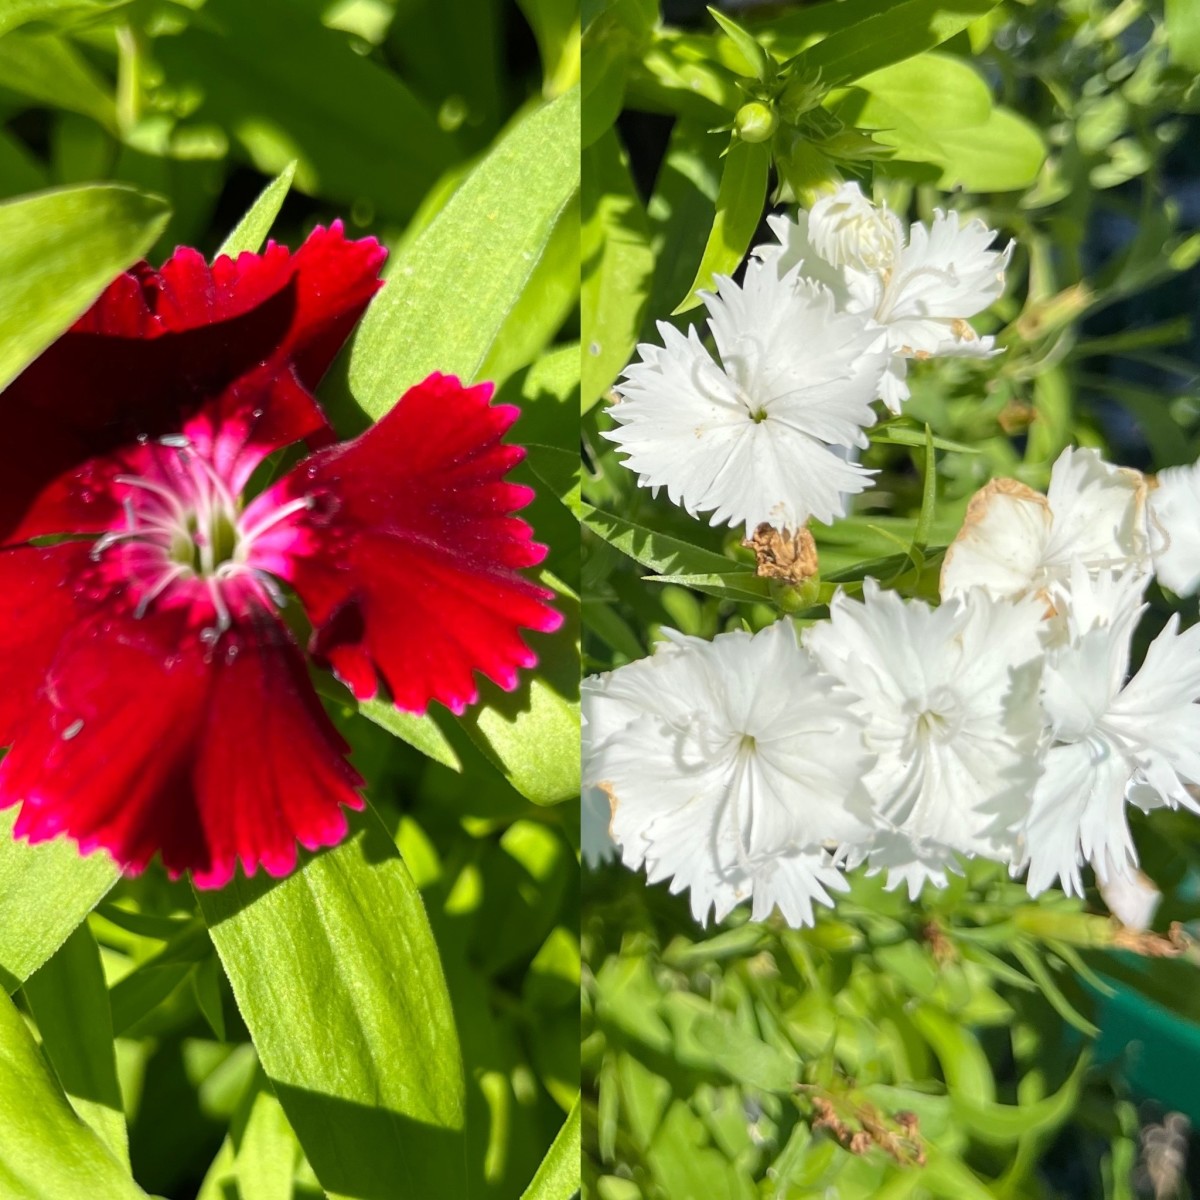 This is a pair of dianthus I saw in a local garden center this fall.